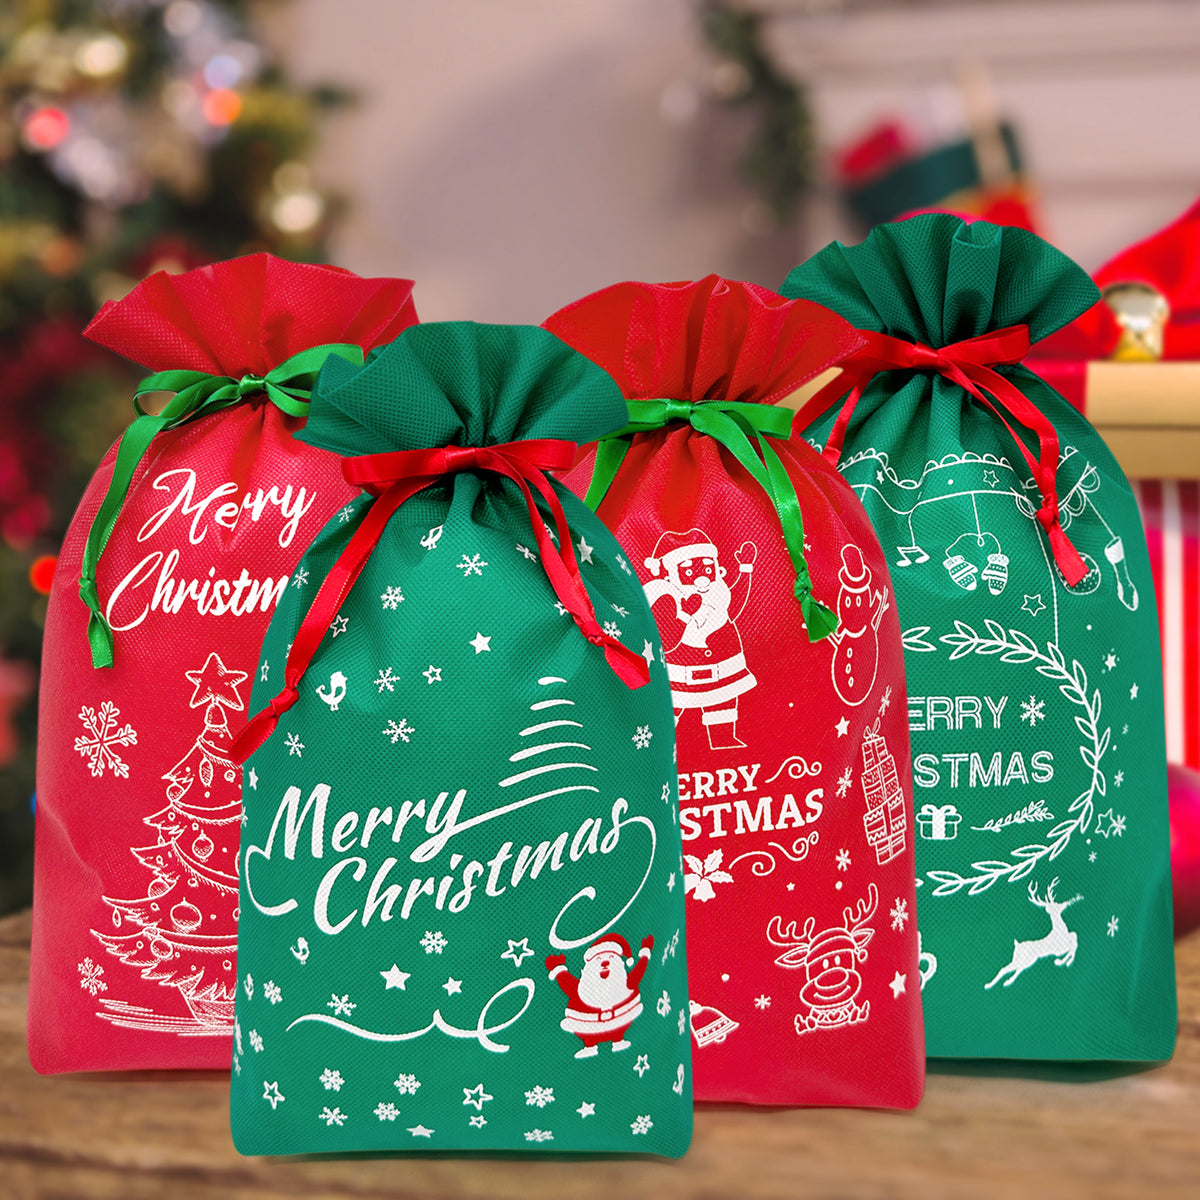 Wrapables Non-Woven Christmas Holiday Drawstring Gift Bags for Party Favors, Goodie Bag, Treats, Gift Wrap, Parties (Set of 8)